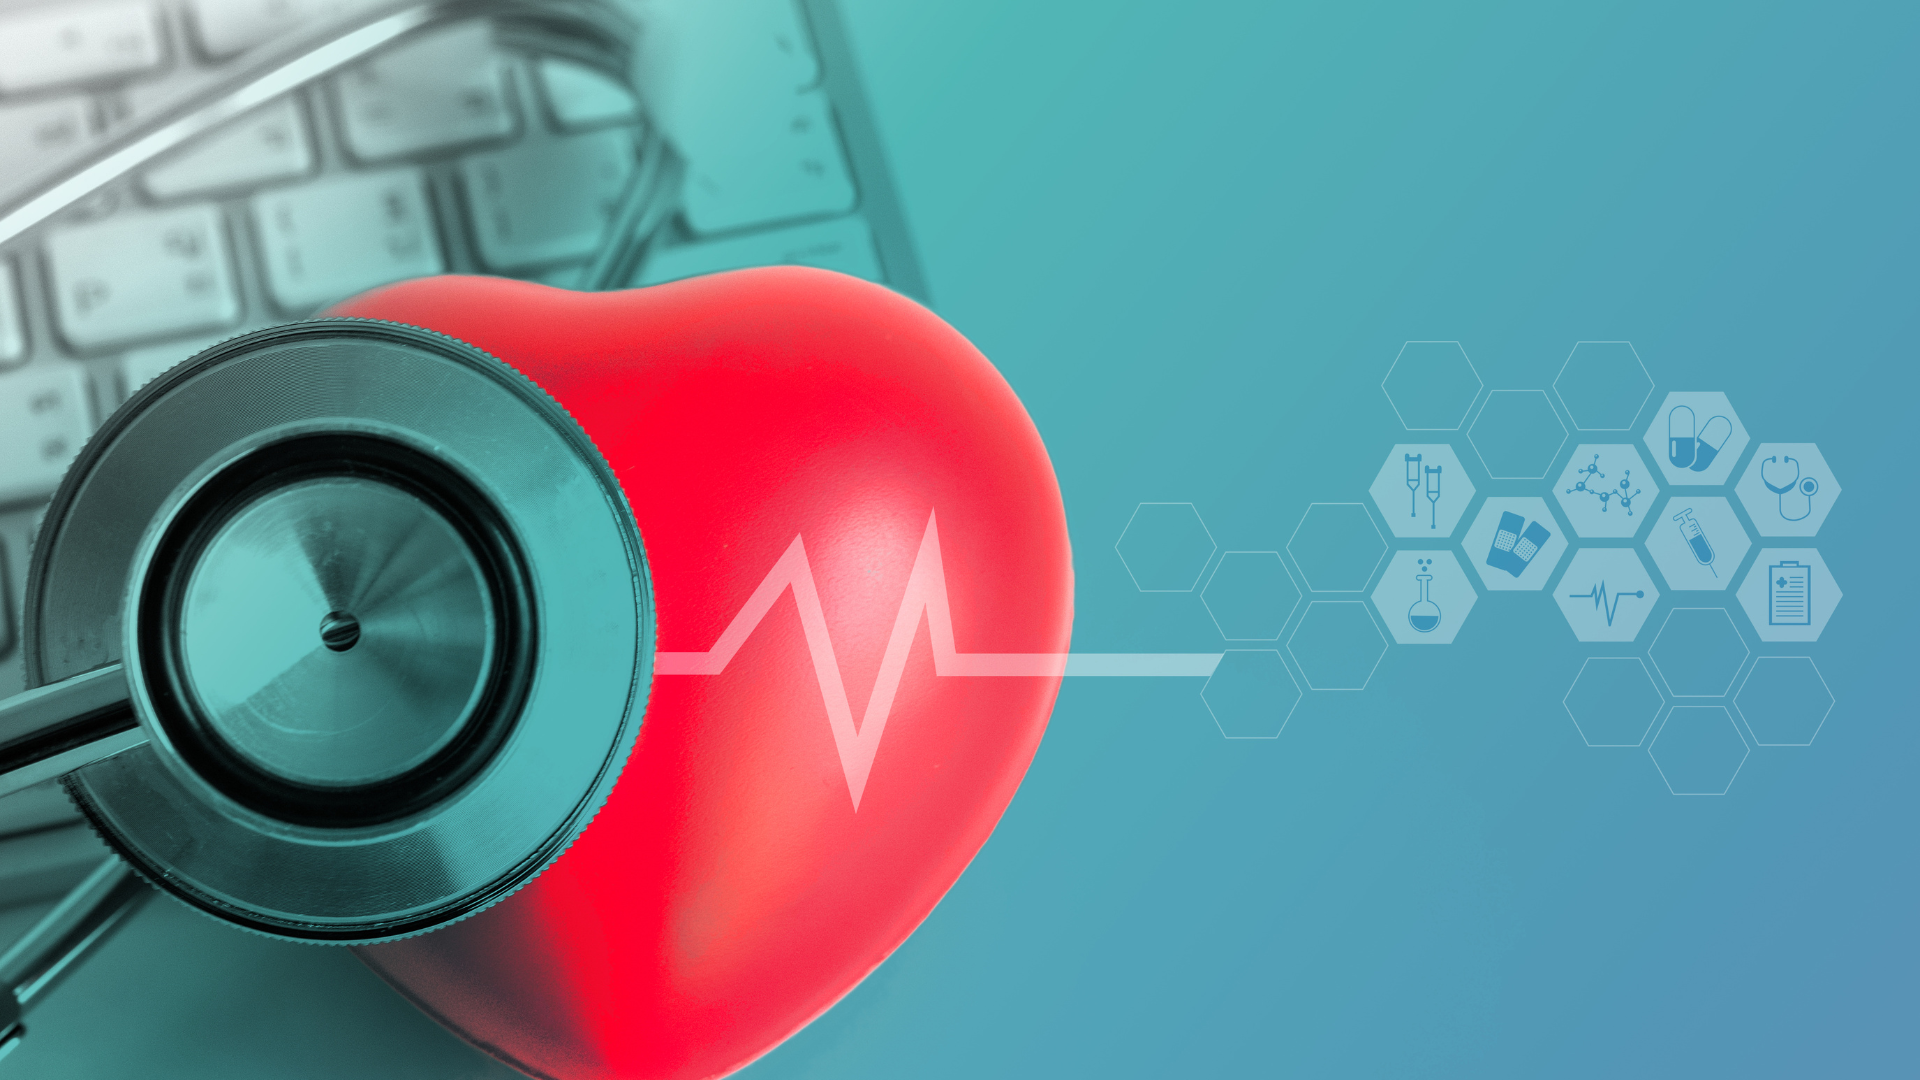 A red toy heart with a stethoscope sits on a keyboard on a blue background, with a heart rhythm and health data icons superimposed over the image, representing AI in population health management.